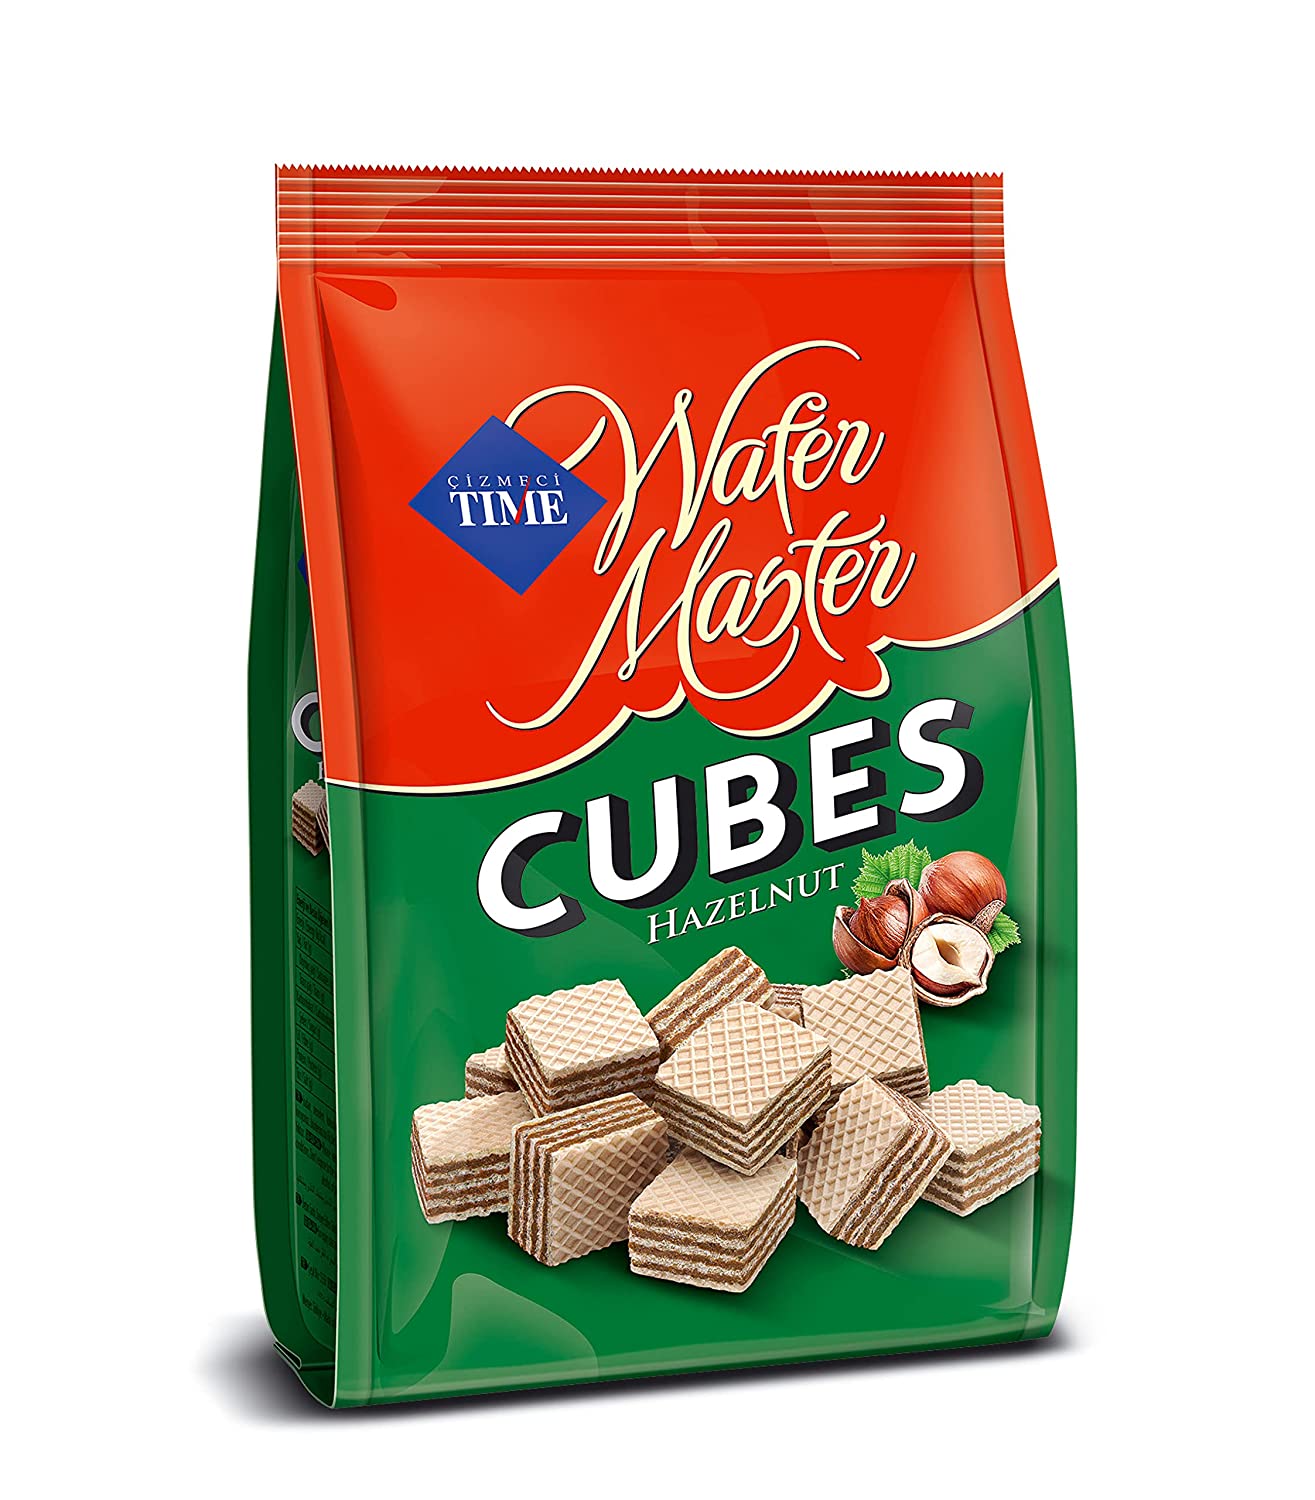 Wafer Master Cubes Hazelnut Pouch Pack (100G)) - Aytac Foods